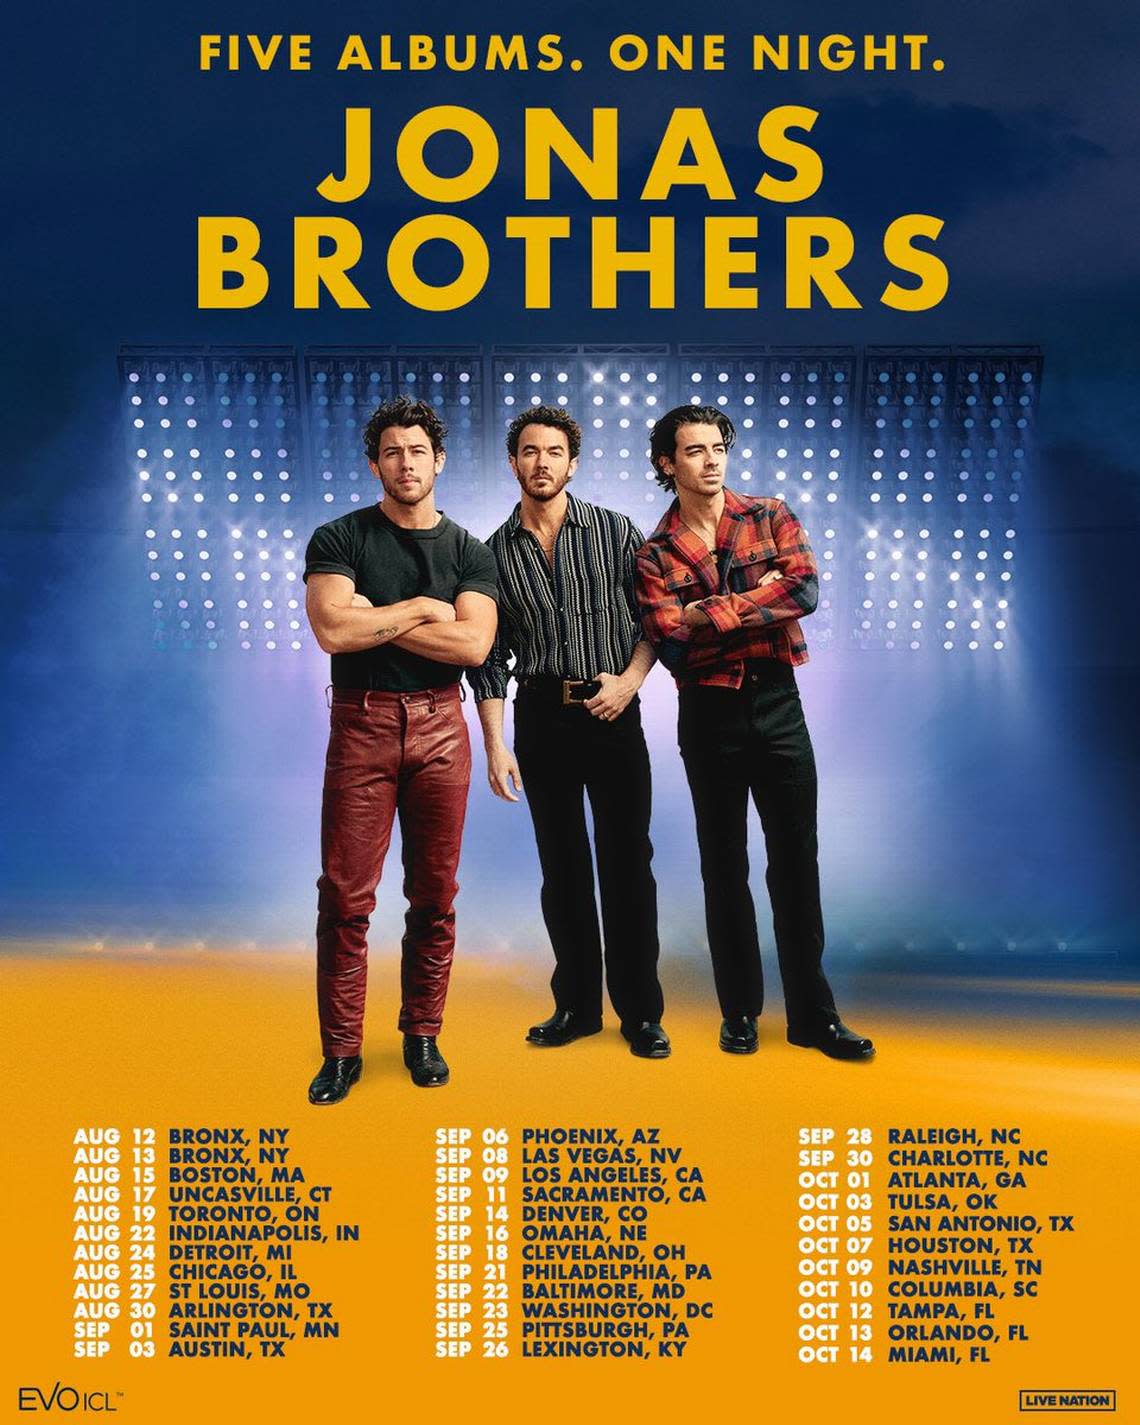 The Jonas Brothers announced dates for their upcoming tour.